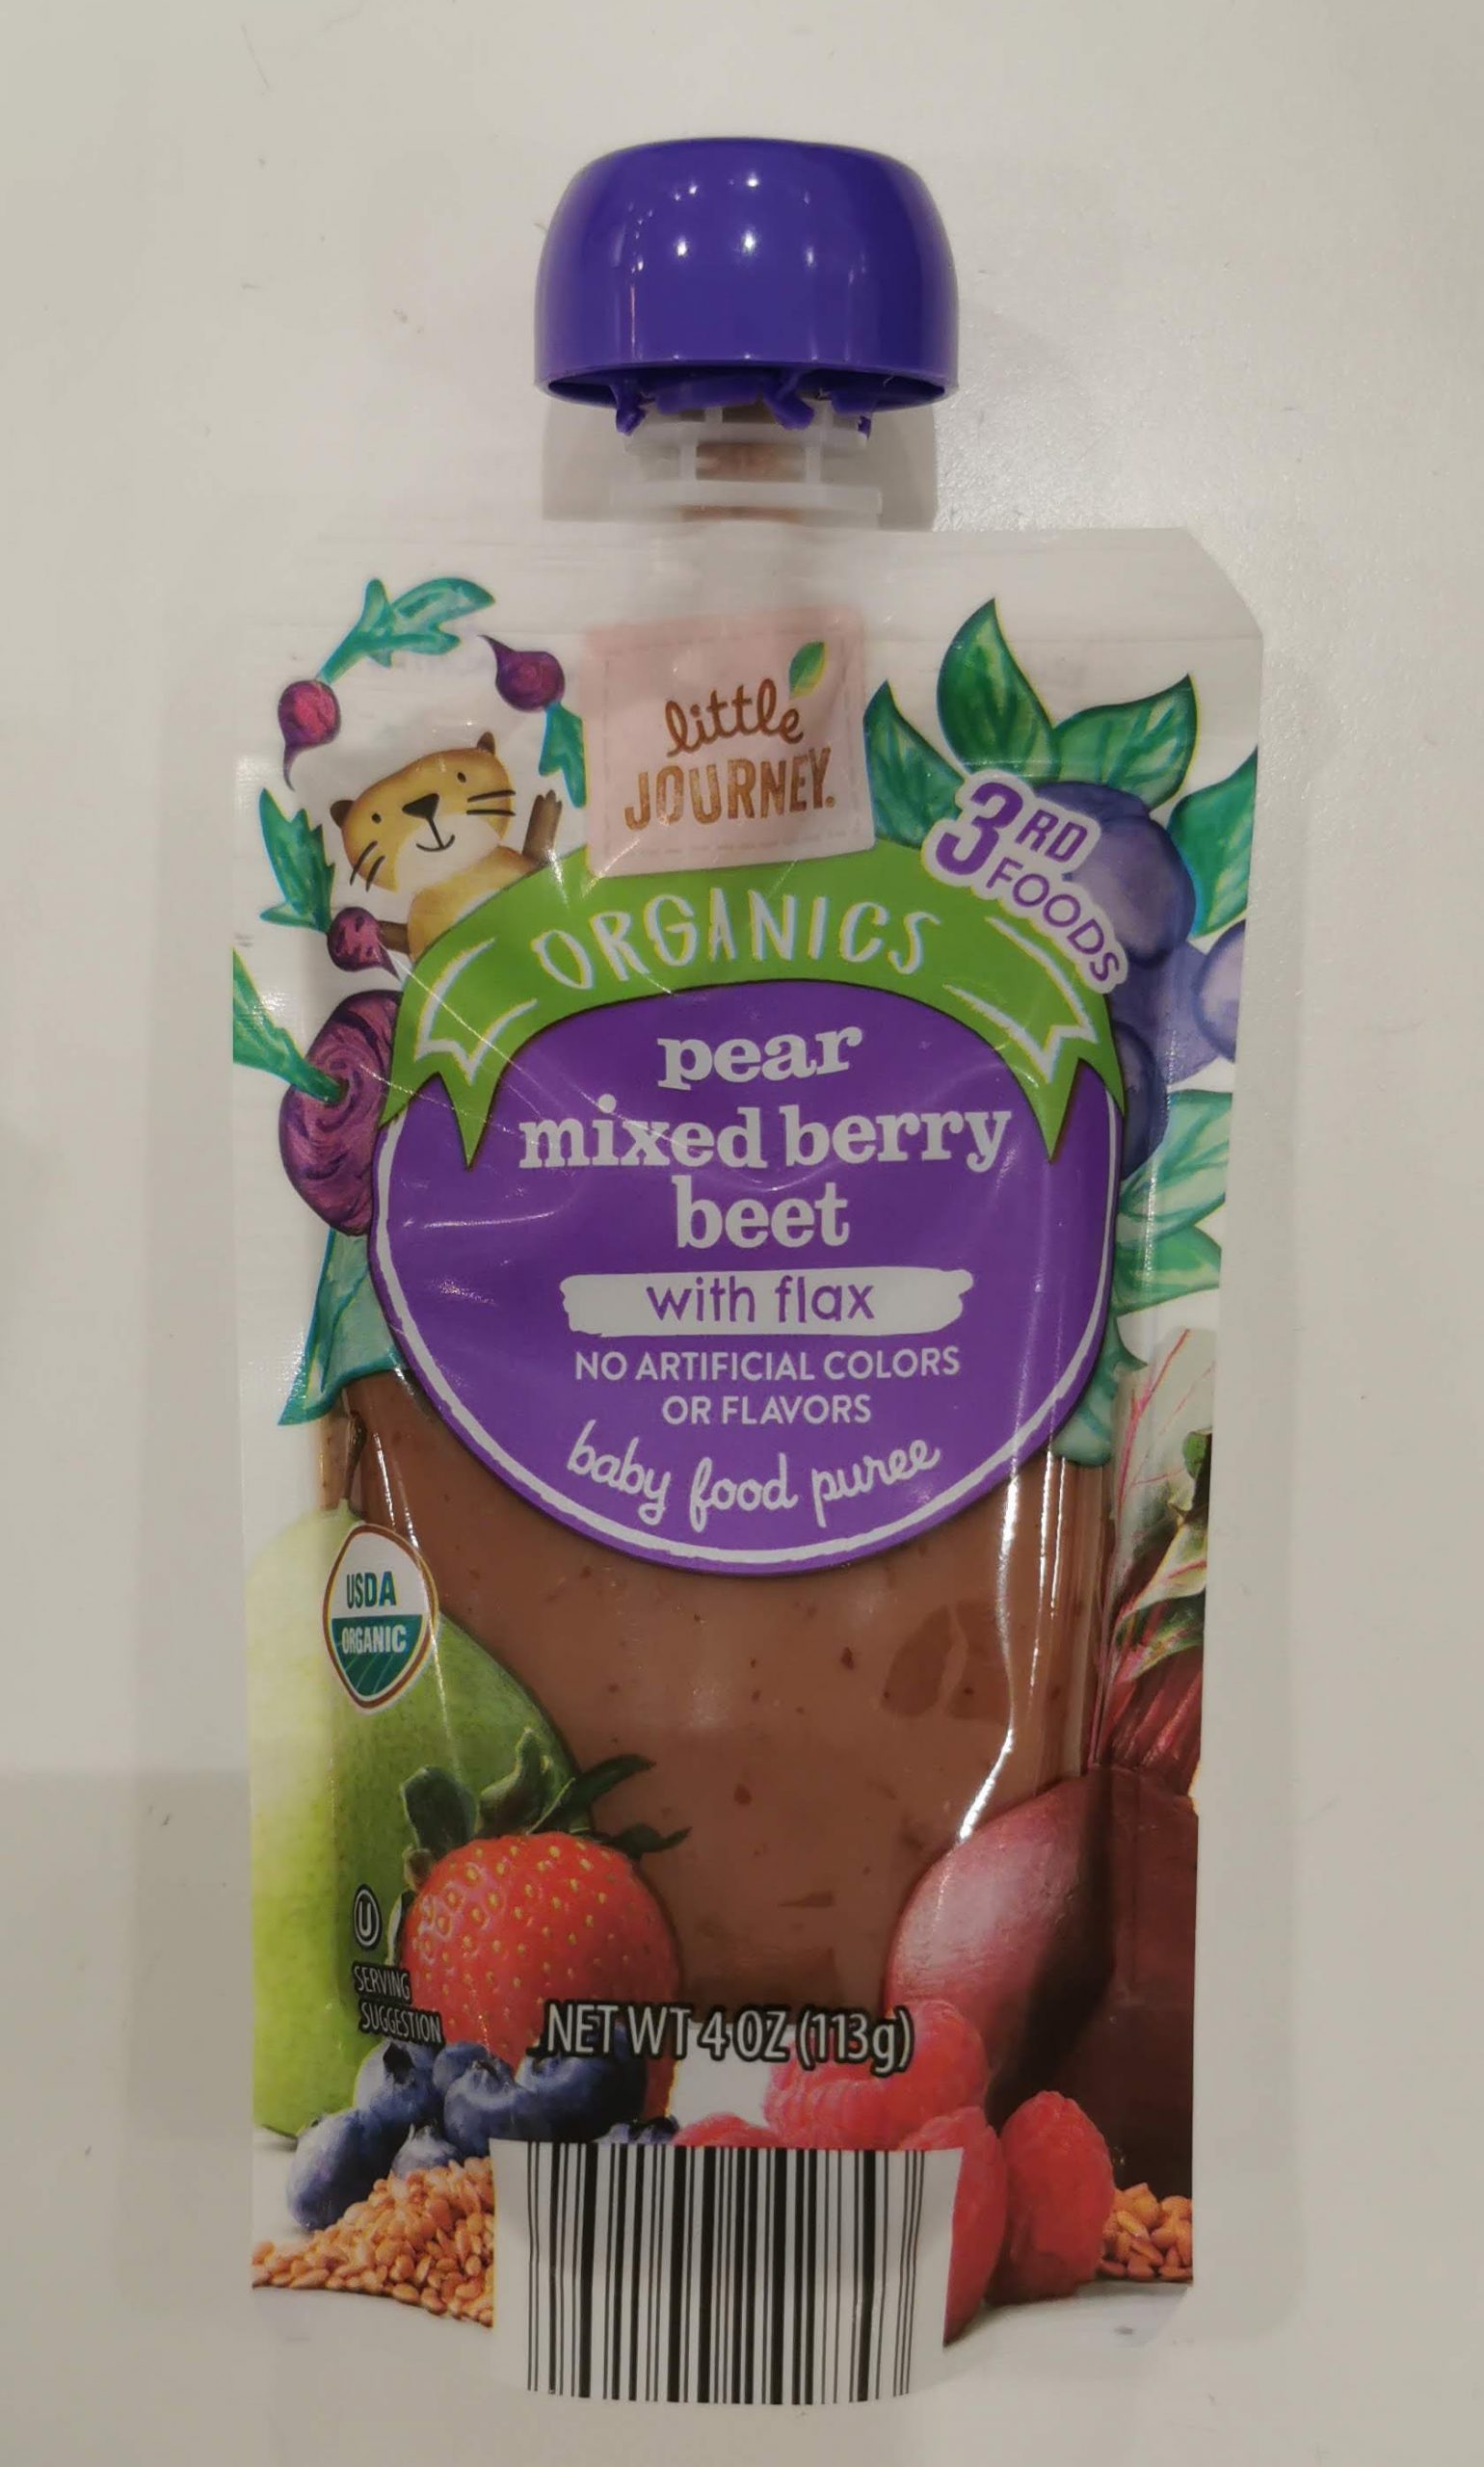 You are currently viewing Little Journey Organics Pear Mixed Berry Beet with Flax Baby Food Puree (Aldi)